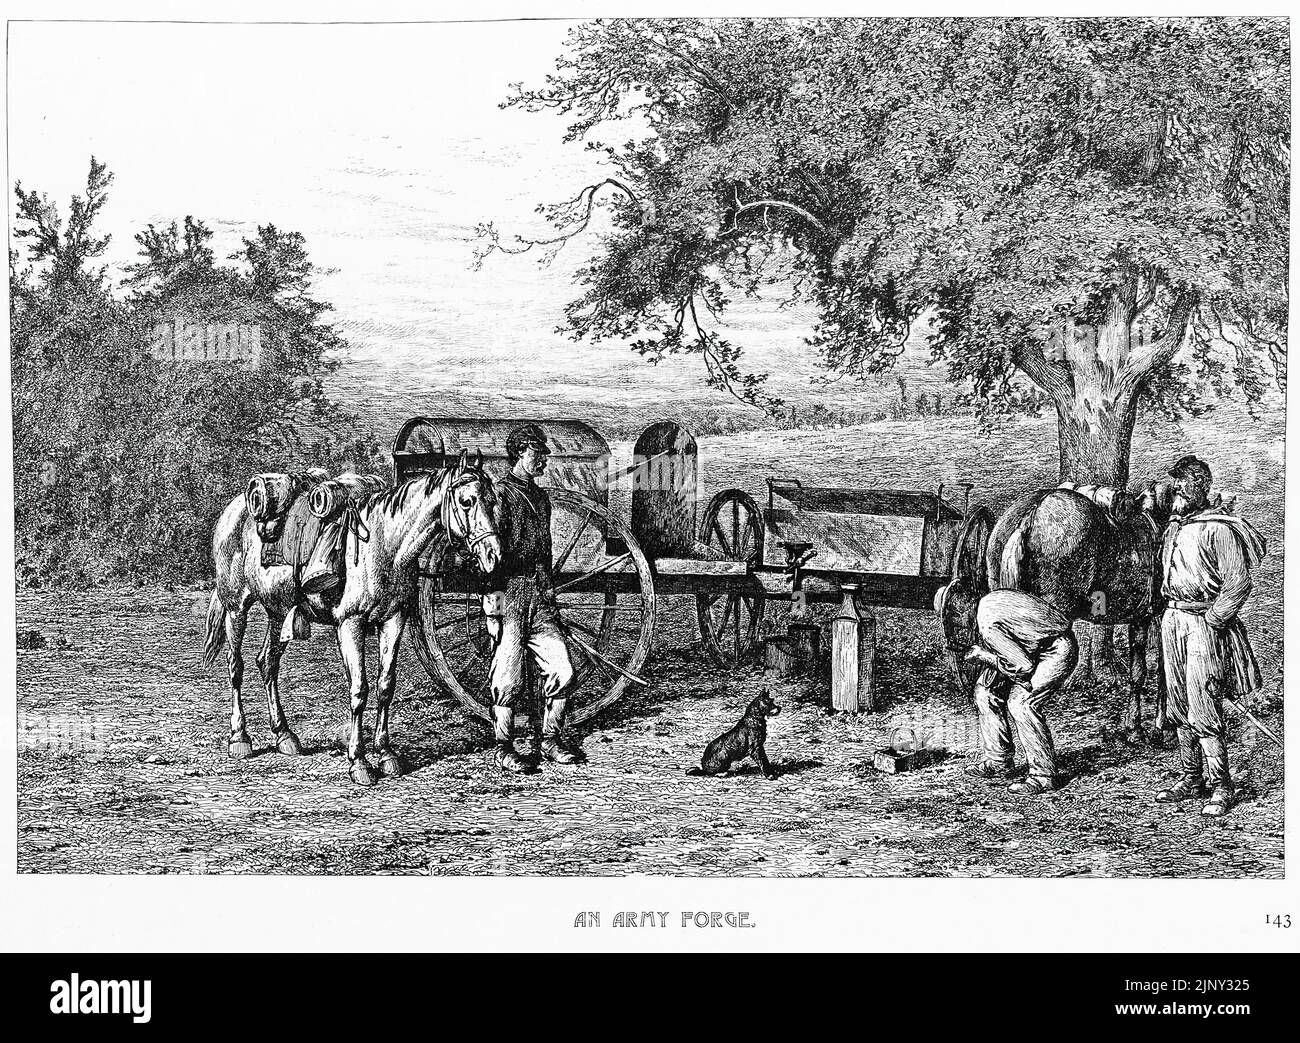 An Army Forge. Union Army blacksmithing. 19th century American Civil War illustration by Edwin Forbes Stock Photo